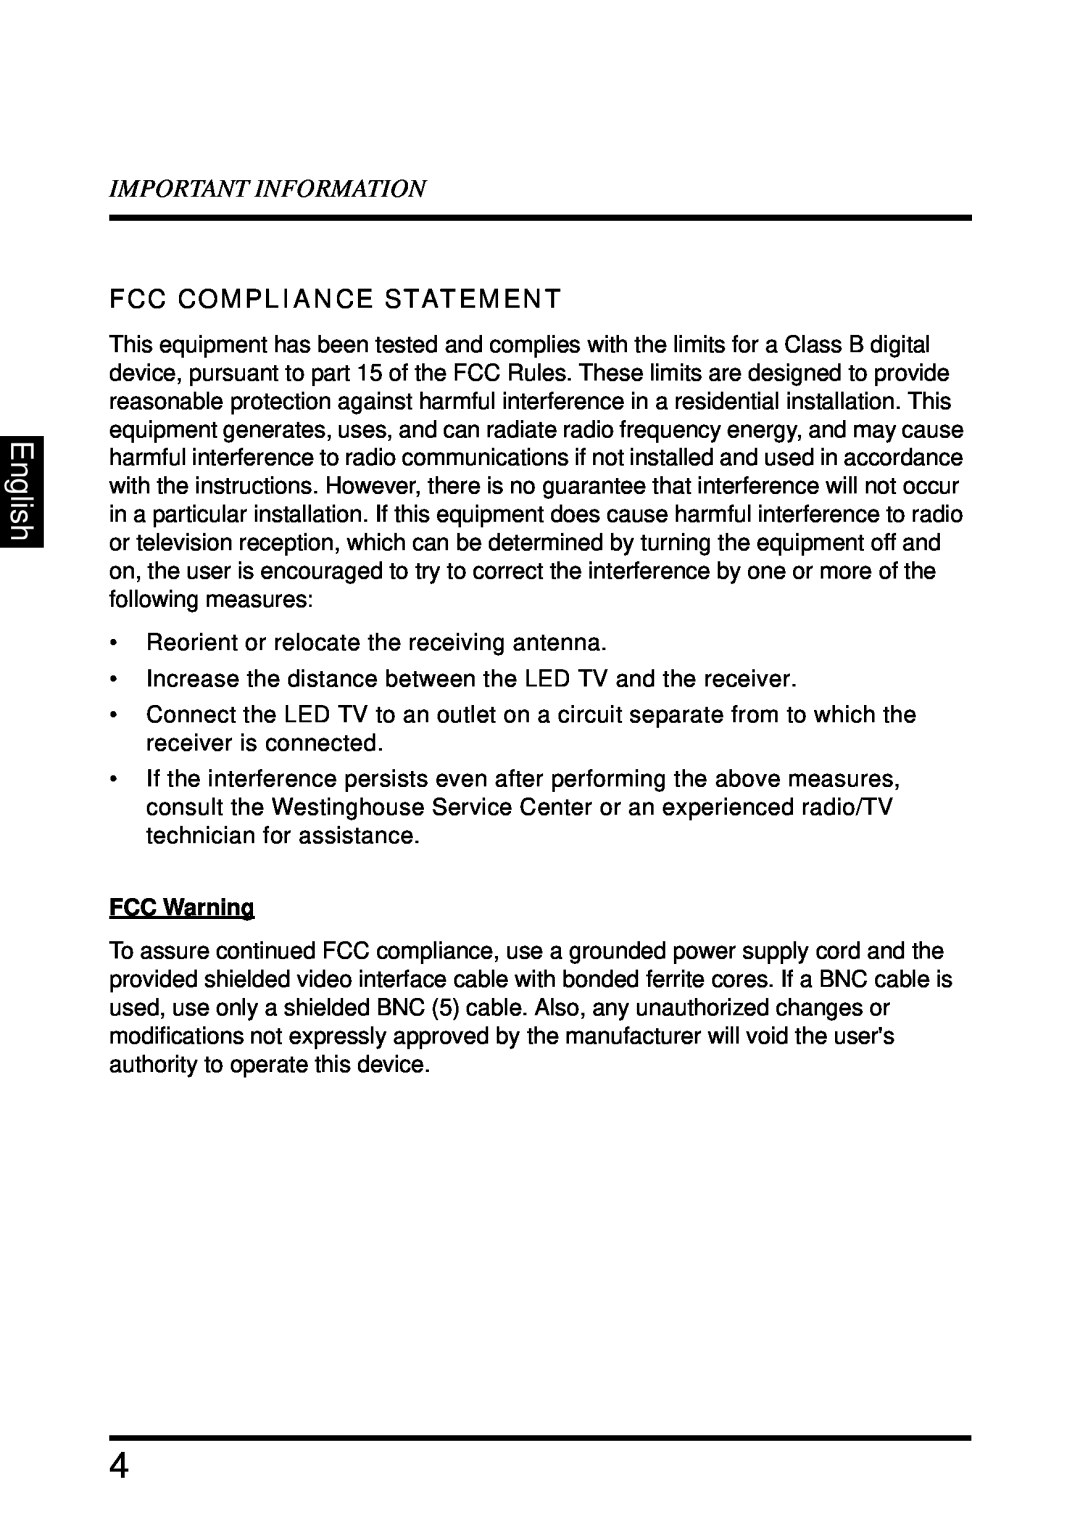 Westinghouse LD-4680 user manual English, Important Information, Fcc Compliance Statement, FCC Warning 